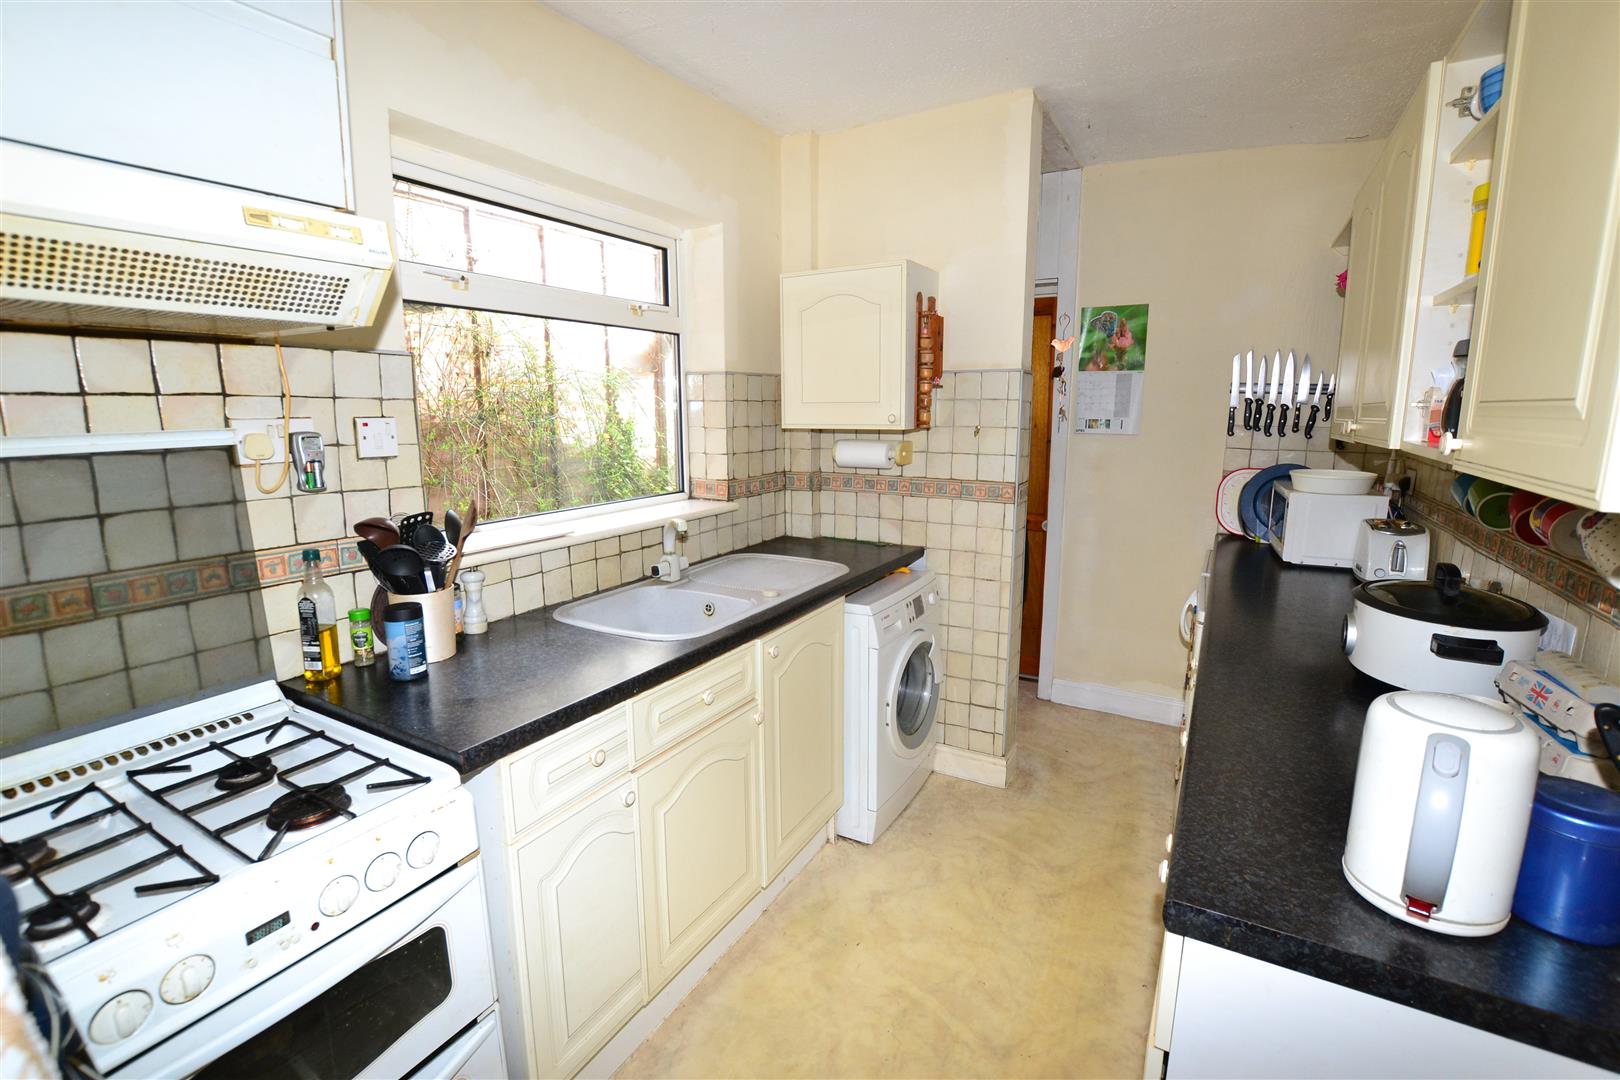 Westfield Road Caversham house for sale in Reading